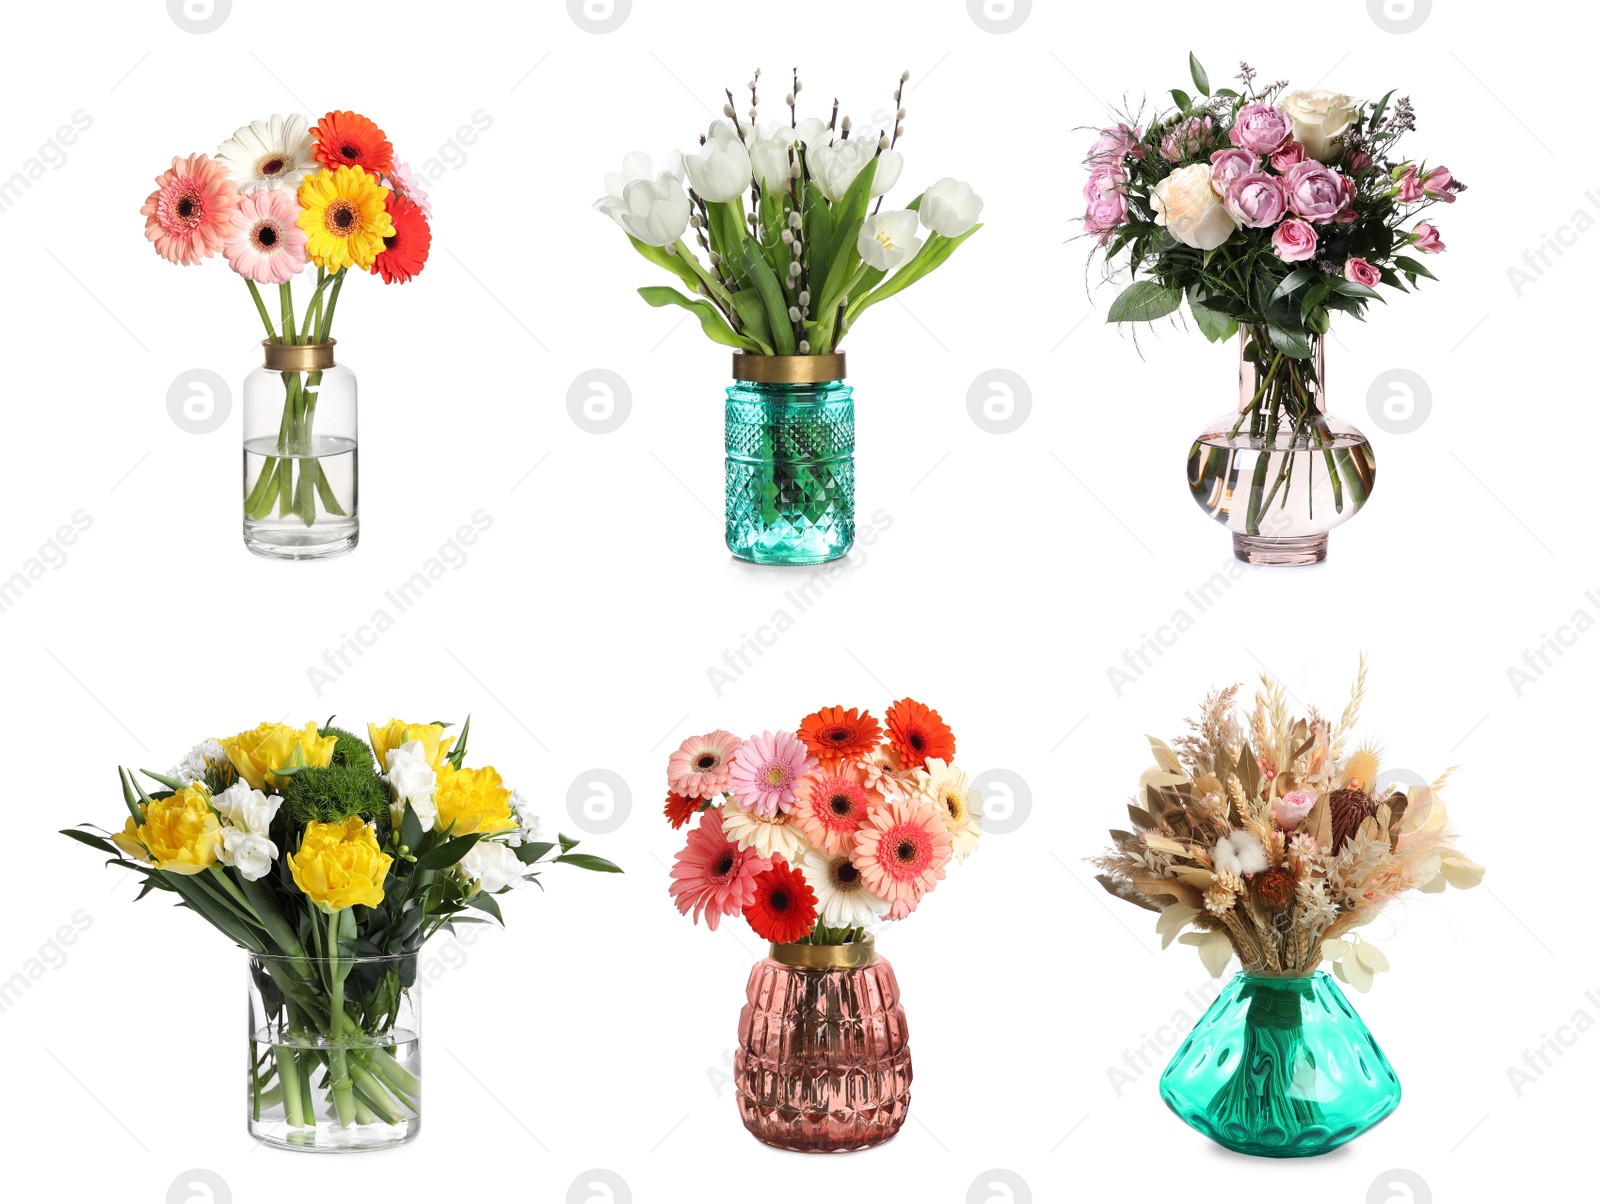 Image of Collage with various beautiful flowers in glass vases on white background